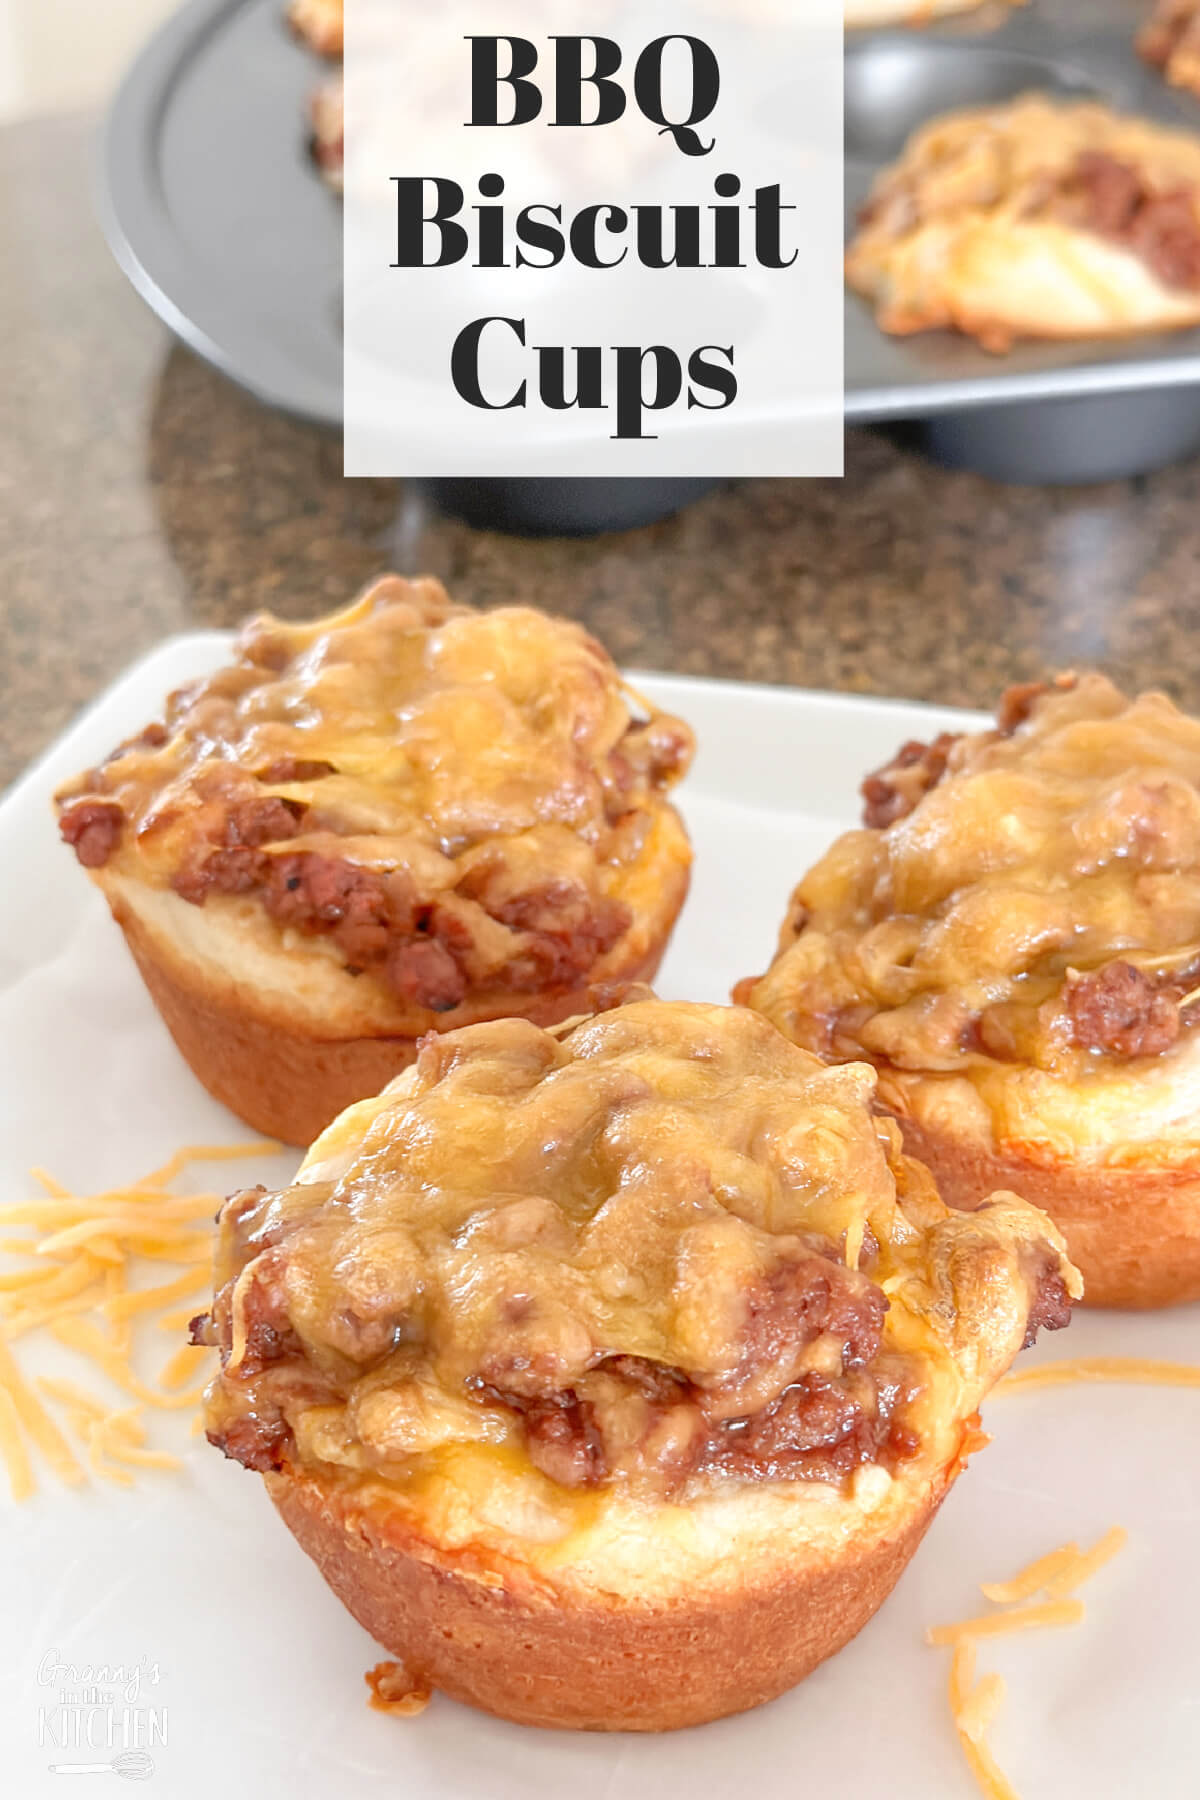 BBQ biscuit cups with text overlay of the recipe name.